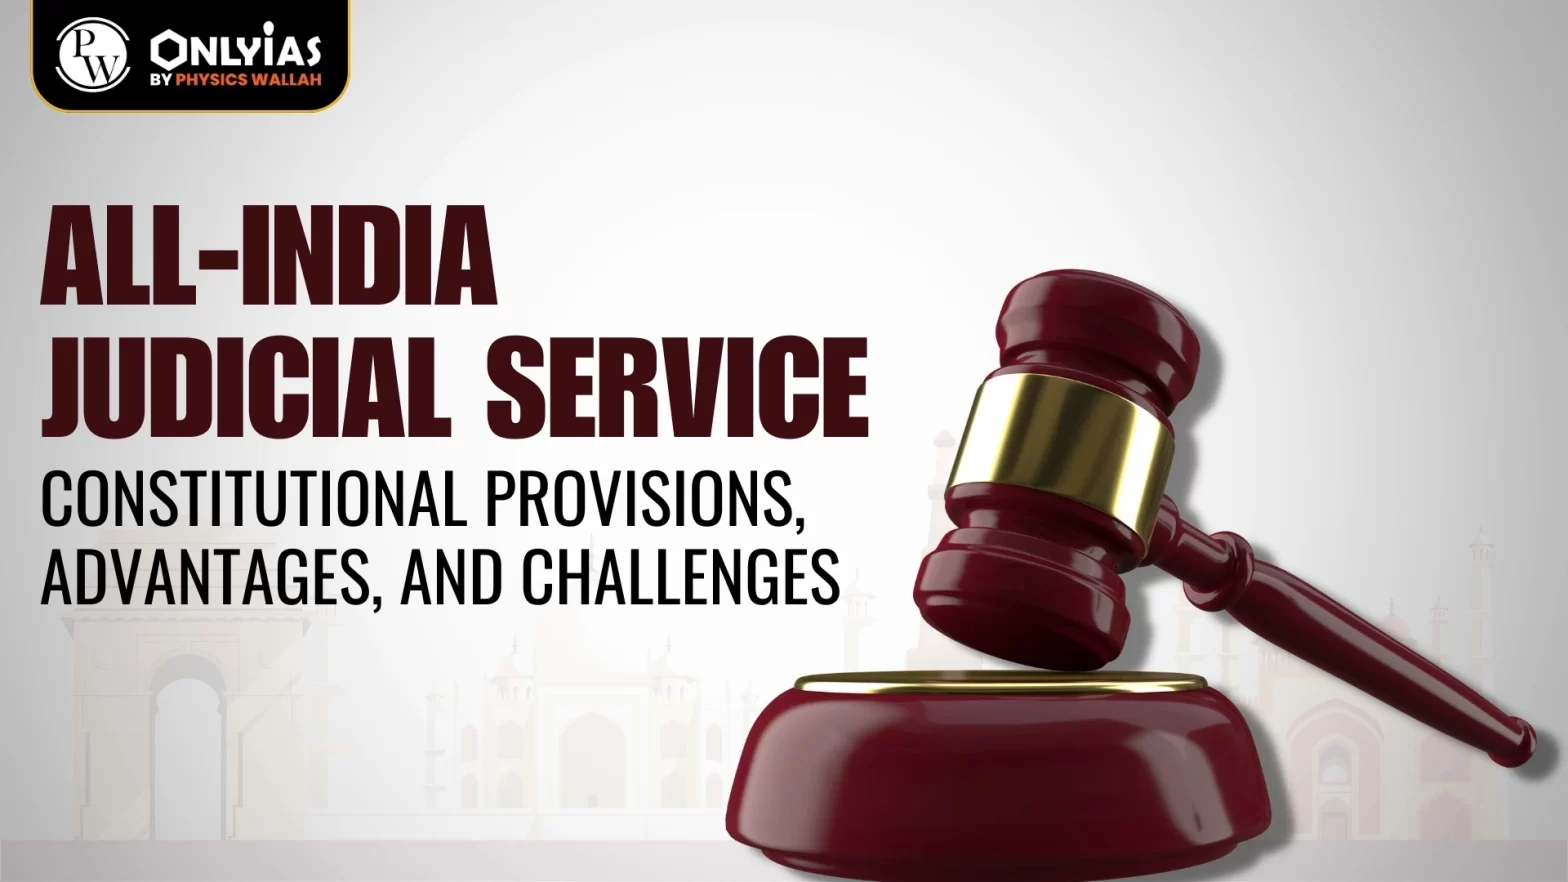 All-India Judicial Service: Constitutional Provisions, Advantages, and Challenges